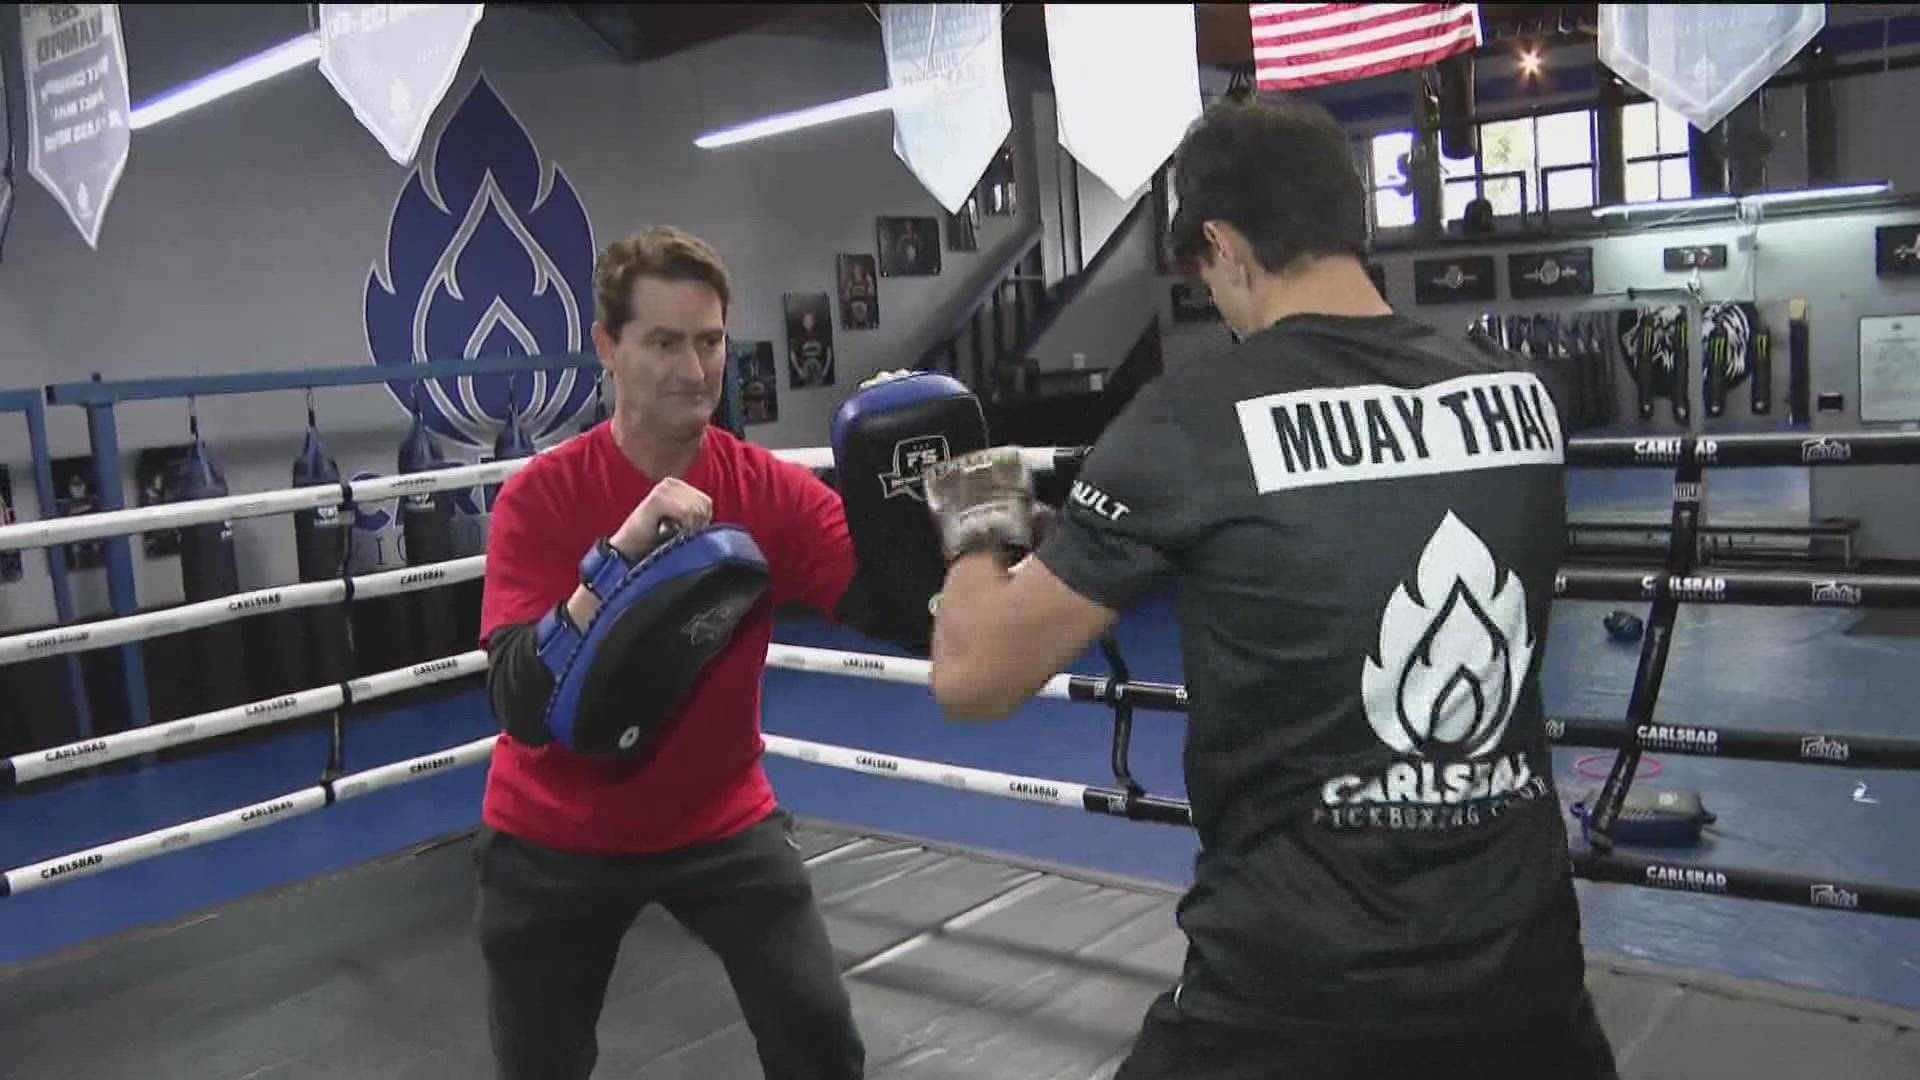 TV reporter climbs in the ring with David Delapaz; a two-time martial arts world champion.